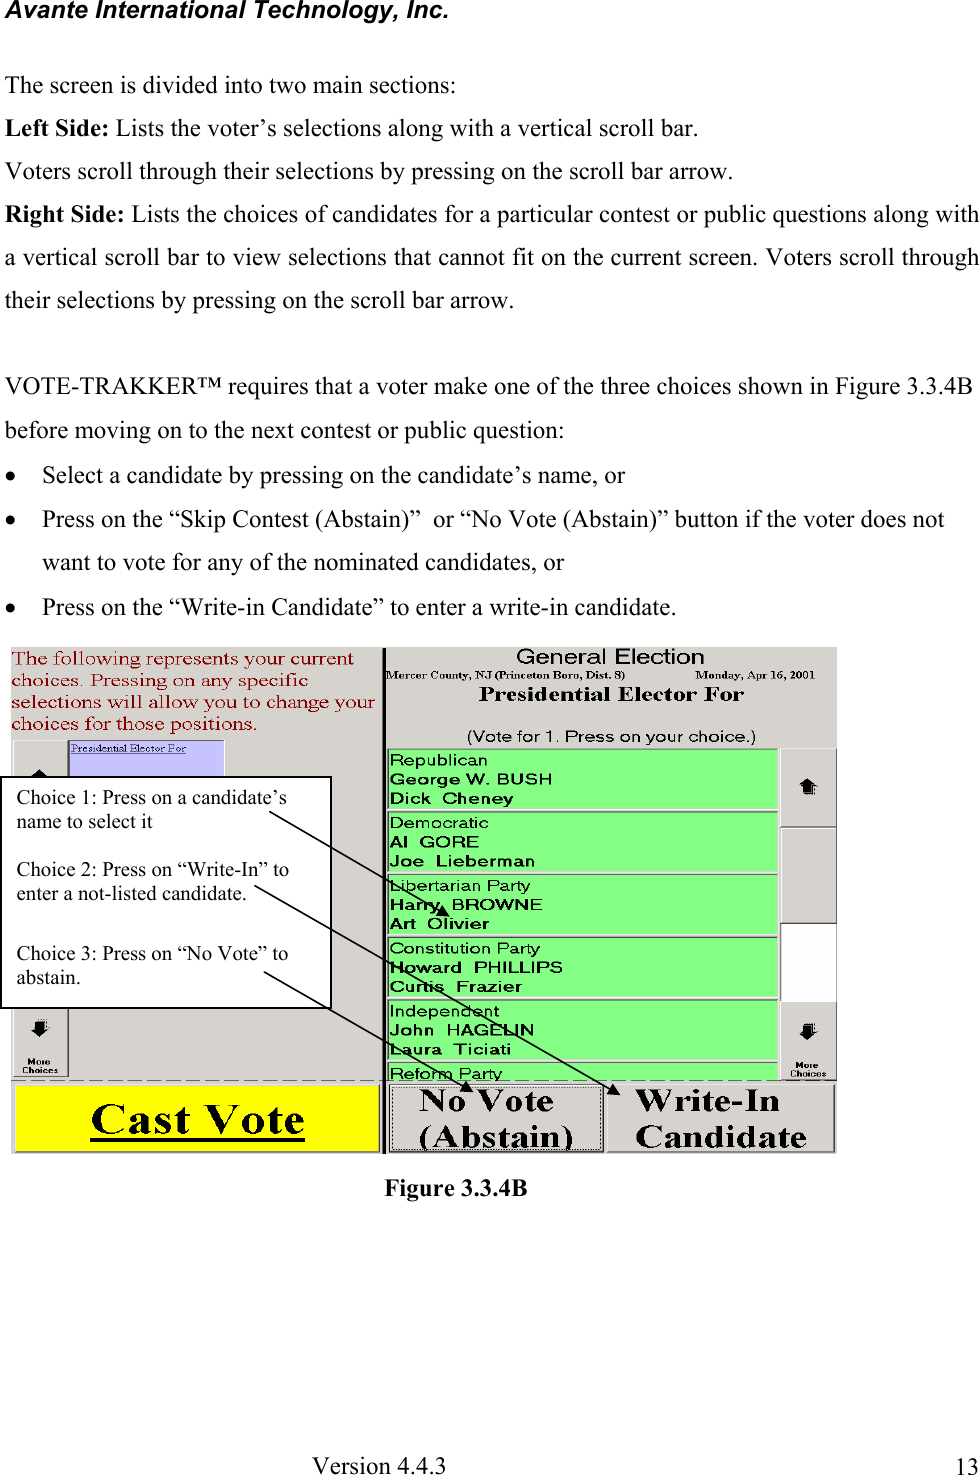 Avante International Technology, Inc.  Version 4.4.3  13The screen is divided into two main sections:  Left Side: Lists the voter’s selections along with a vertical scroll bar. Voters scroll through their selections by pressing on the scroll bar arrow. Right Side: Lists the choices of candidates for a particular contest or public questions along with a vertical scroll bar to view selections that cannot fit on the current screen. Voters scroll through their selections by pressing on the scroll bar arrow.    VOTE-TRAKKER™ requires that a voter make one of the three choices shown in Figure 3.3.4B before moving on to the next contest or public question: • Select a candidate by pressing on the candidate’s name, or • Press on the “Skip Contest (Abstain)”  or “No Vote (Abstain)” button if the voter does not want to vote for any of the nominated candidates, or  • Press on the “Write-in Candidate” to enter a write-in candidate.   Choice 1: Press on a candidate’s name to select it  Choice 2: Press on “Write-In” to enter a not-listed candidate.   Choice 3: Press on “No Vote” to abstain. Figure 3.3.4B 